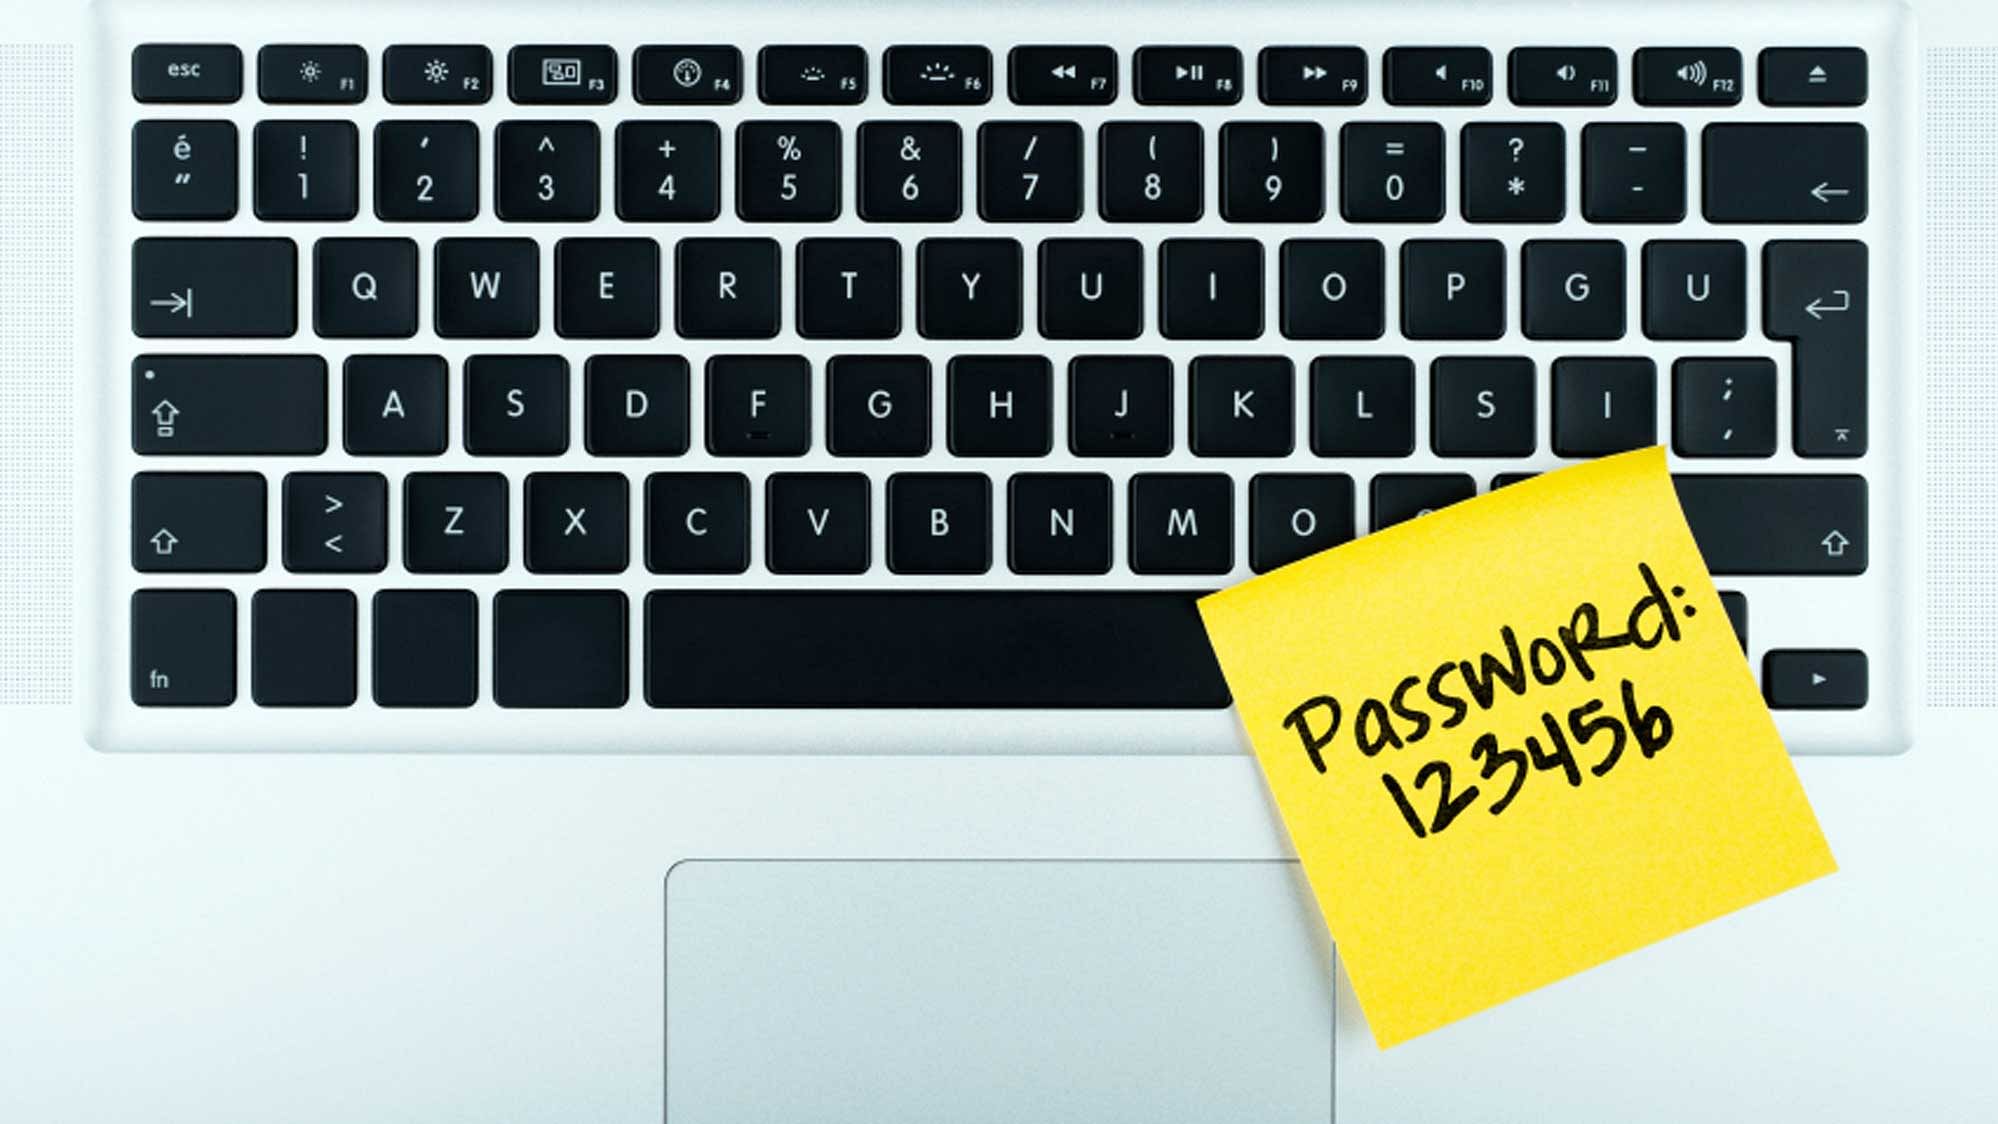 Keeping your password safe is not easy but can be done with these precautions. (Photo: iStockphoto)